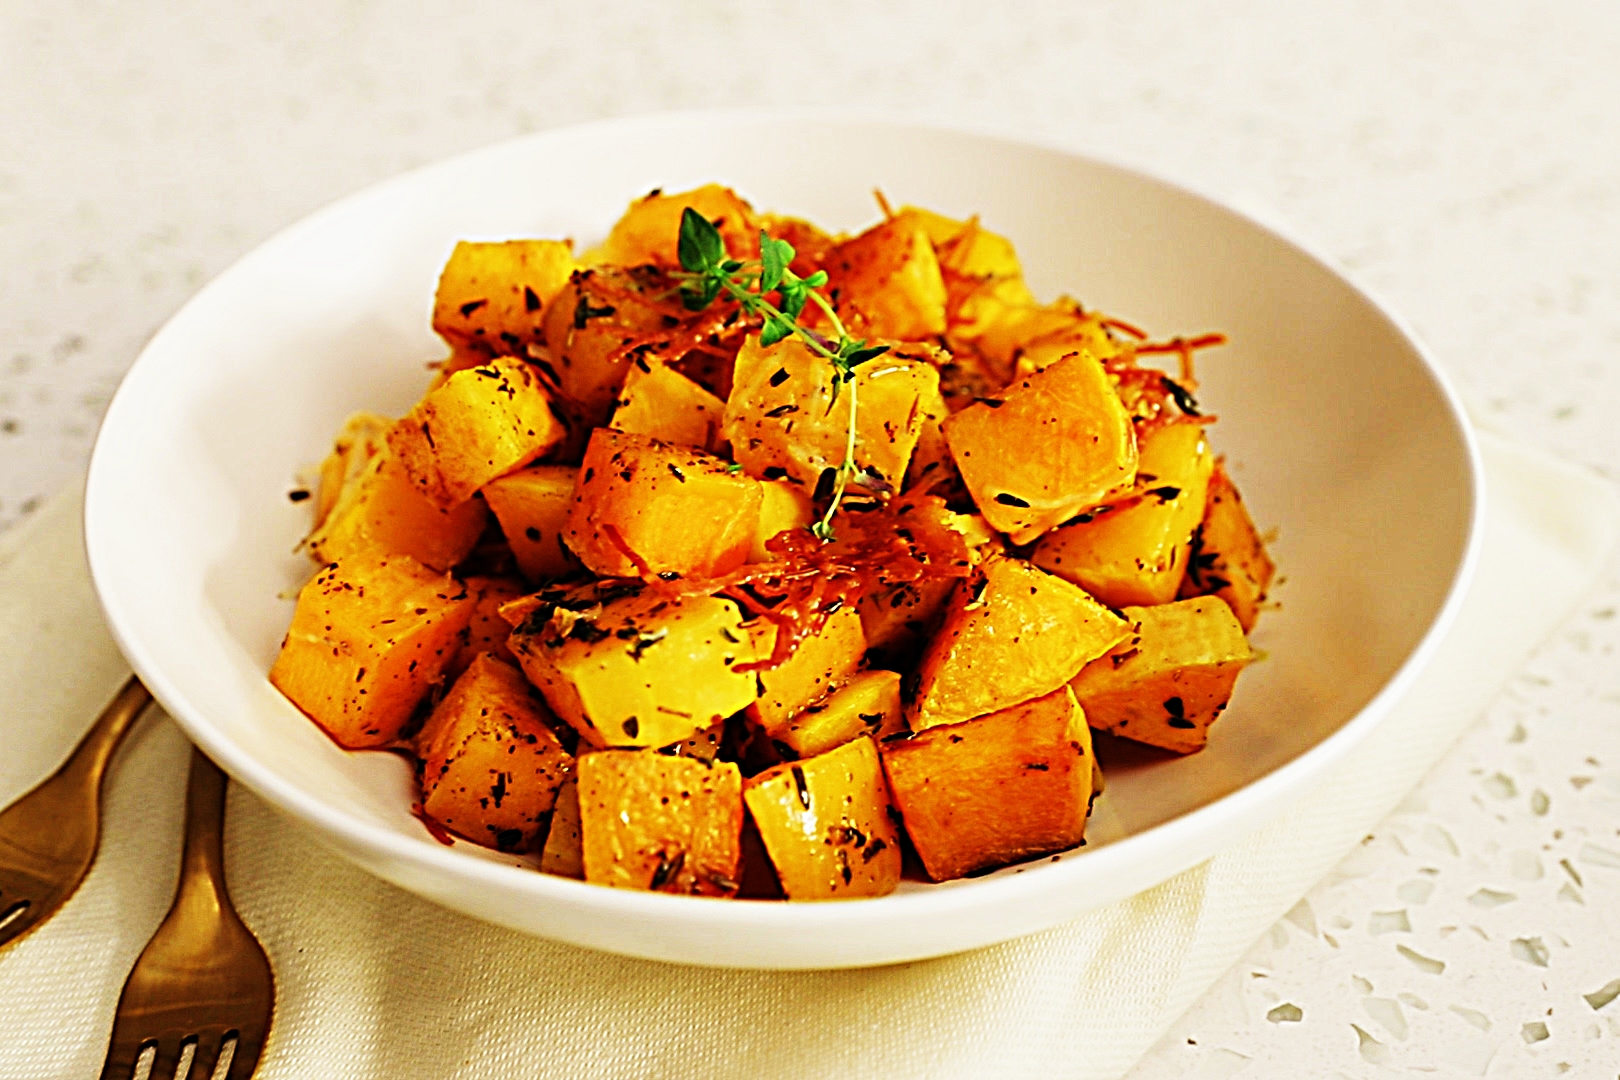 Stupid-Easy Recipe for Parmesan and Thyme Roasted Butternut Squash (#1 Top-Rated)